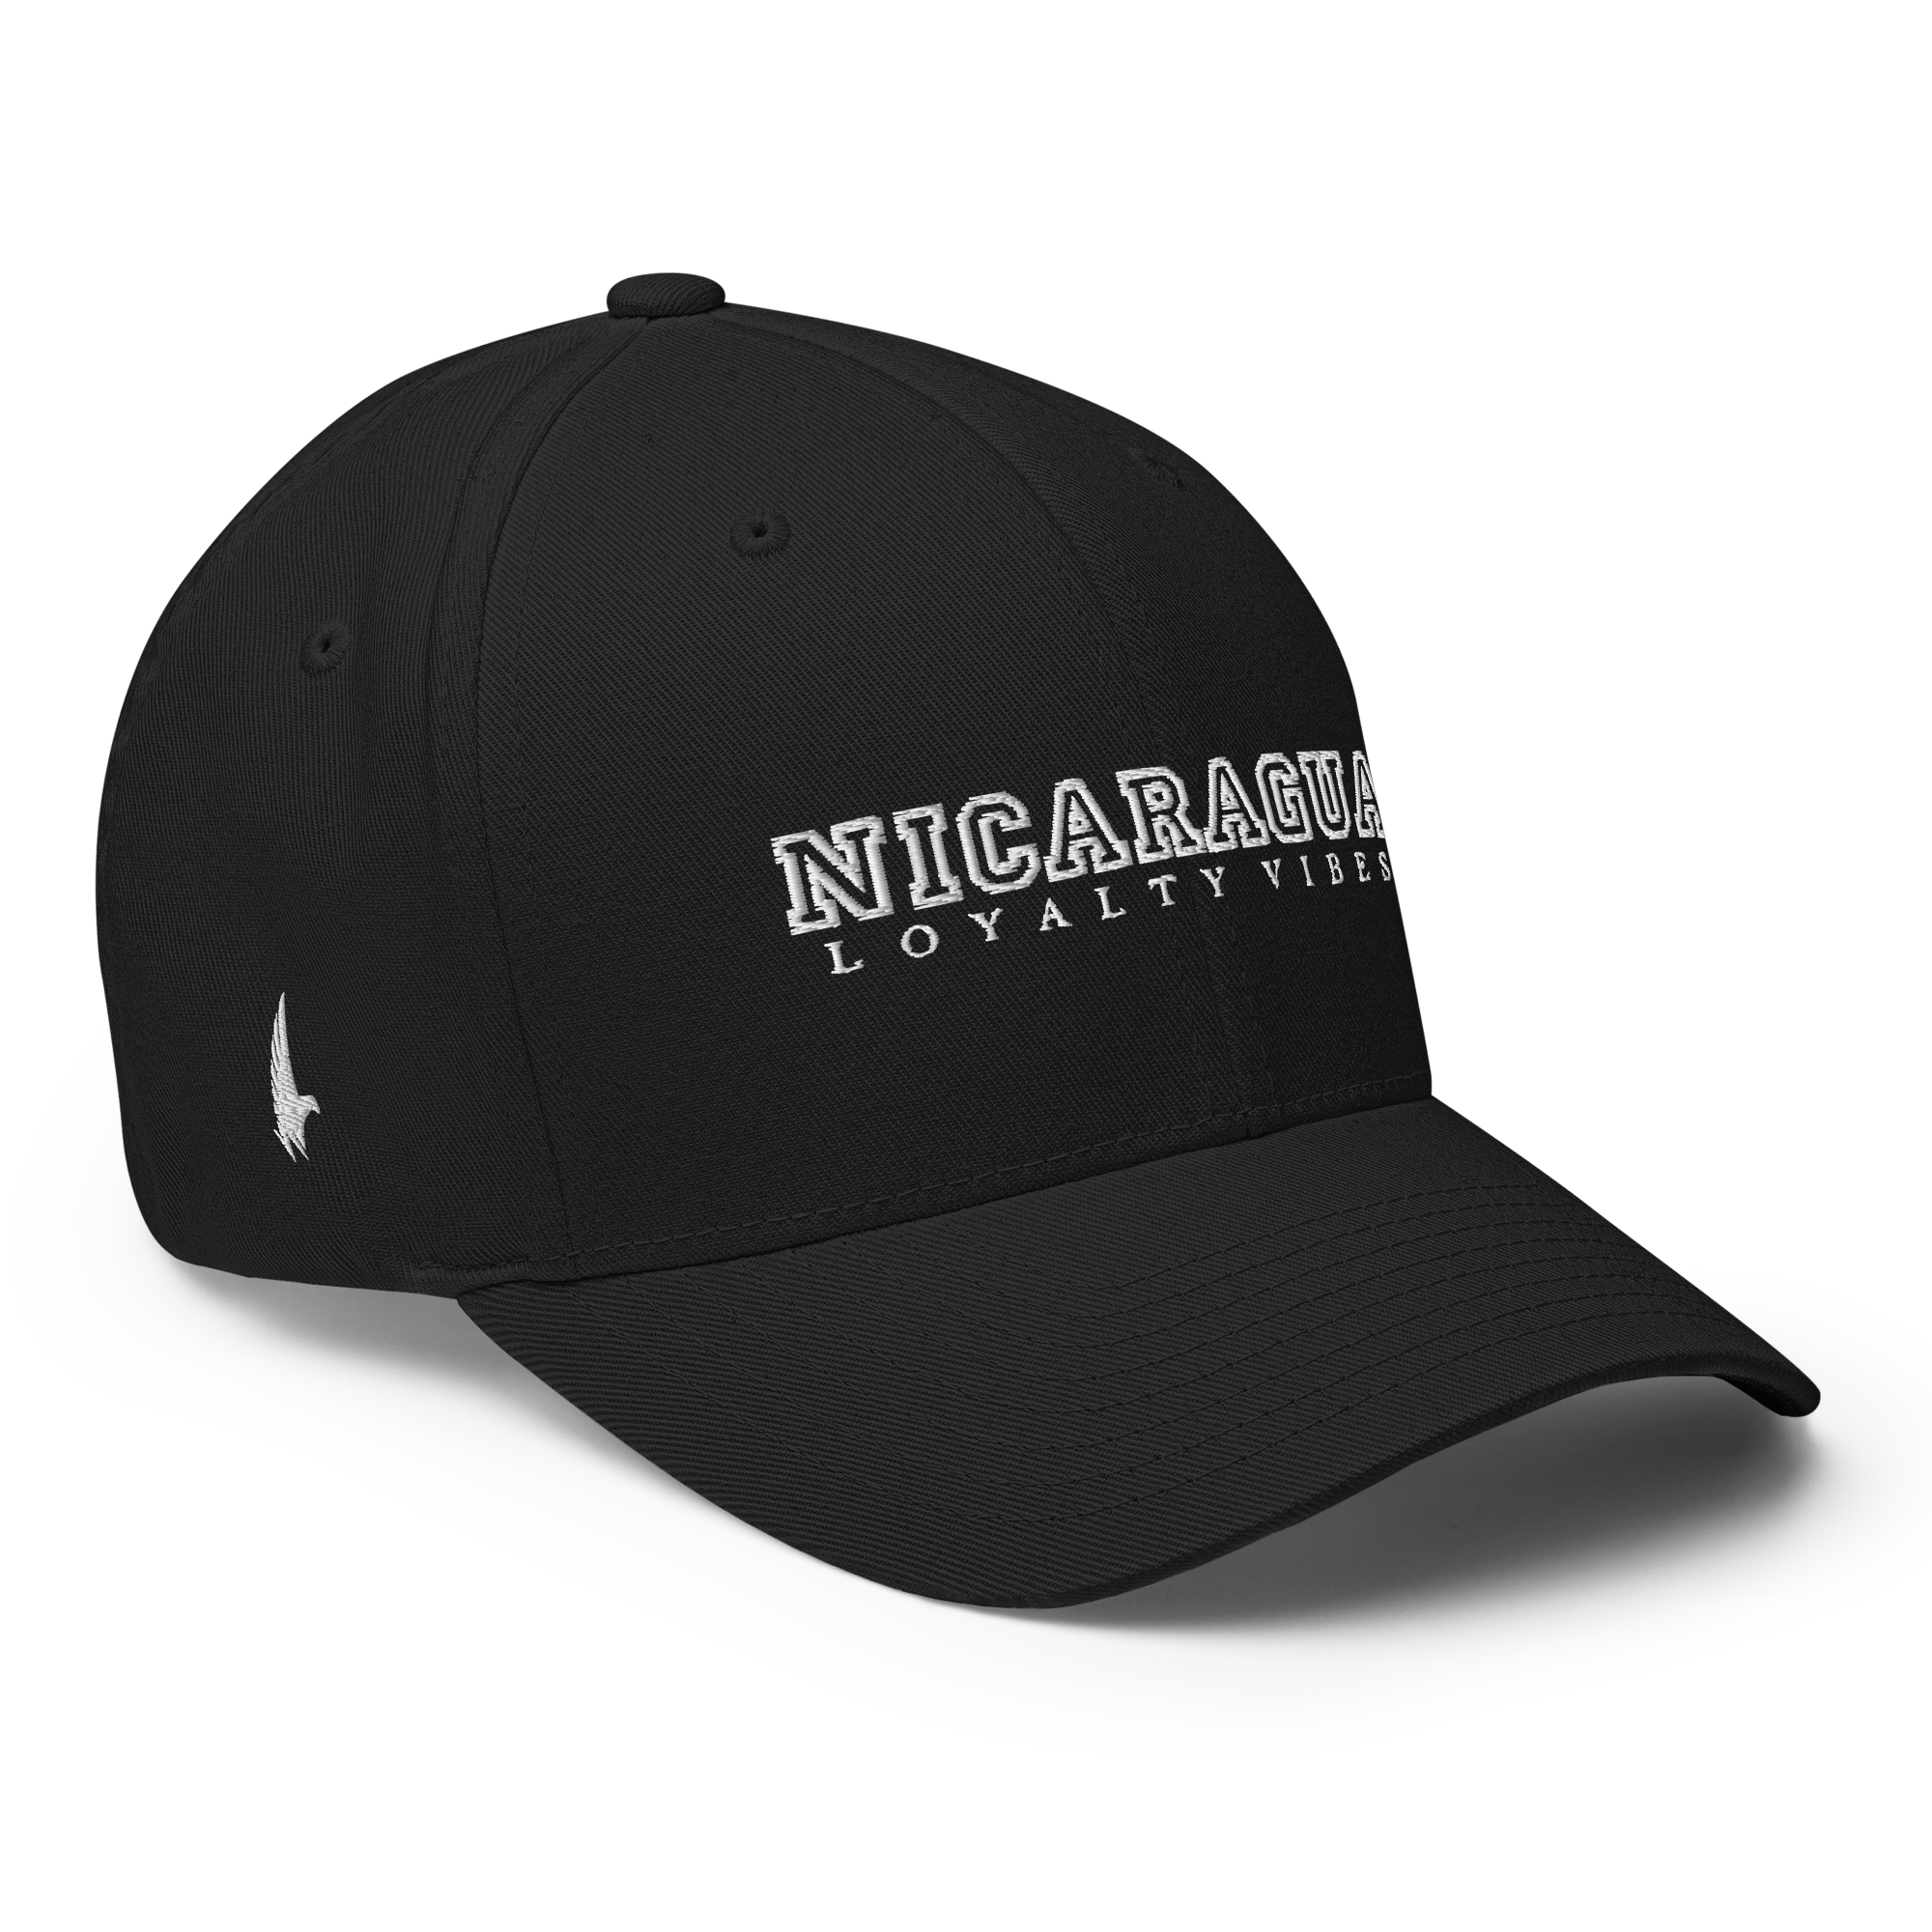 Nicaragua Fitted Hat Black - Loyalty Vibes